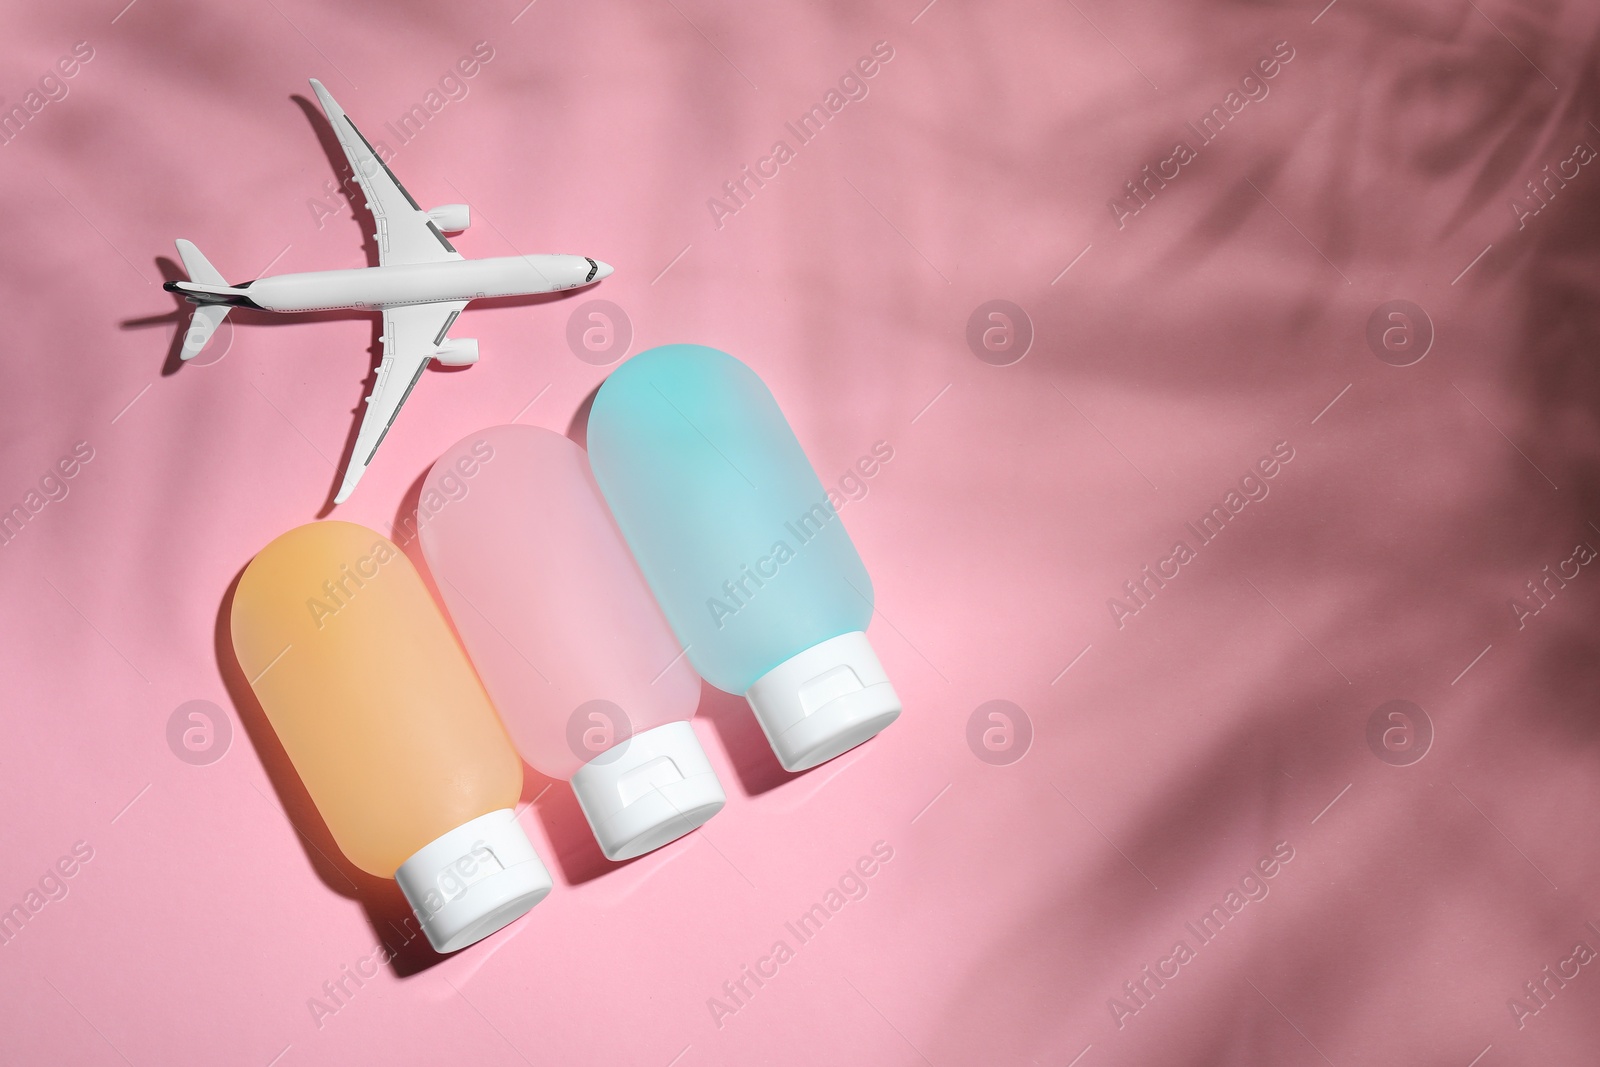 Photo of Cosmetic travel kit and toy plane on pink background, flat lay with space for text. Bath accessories